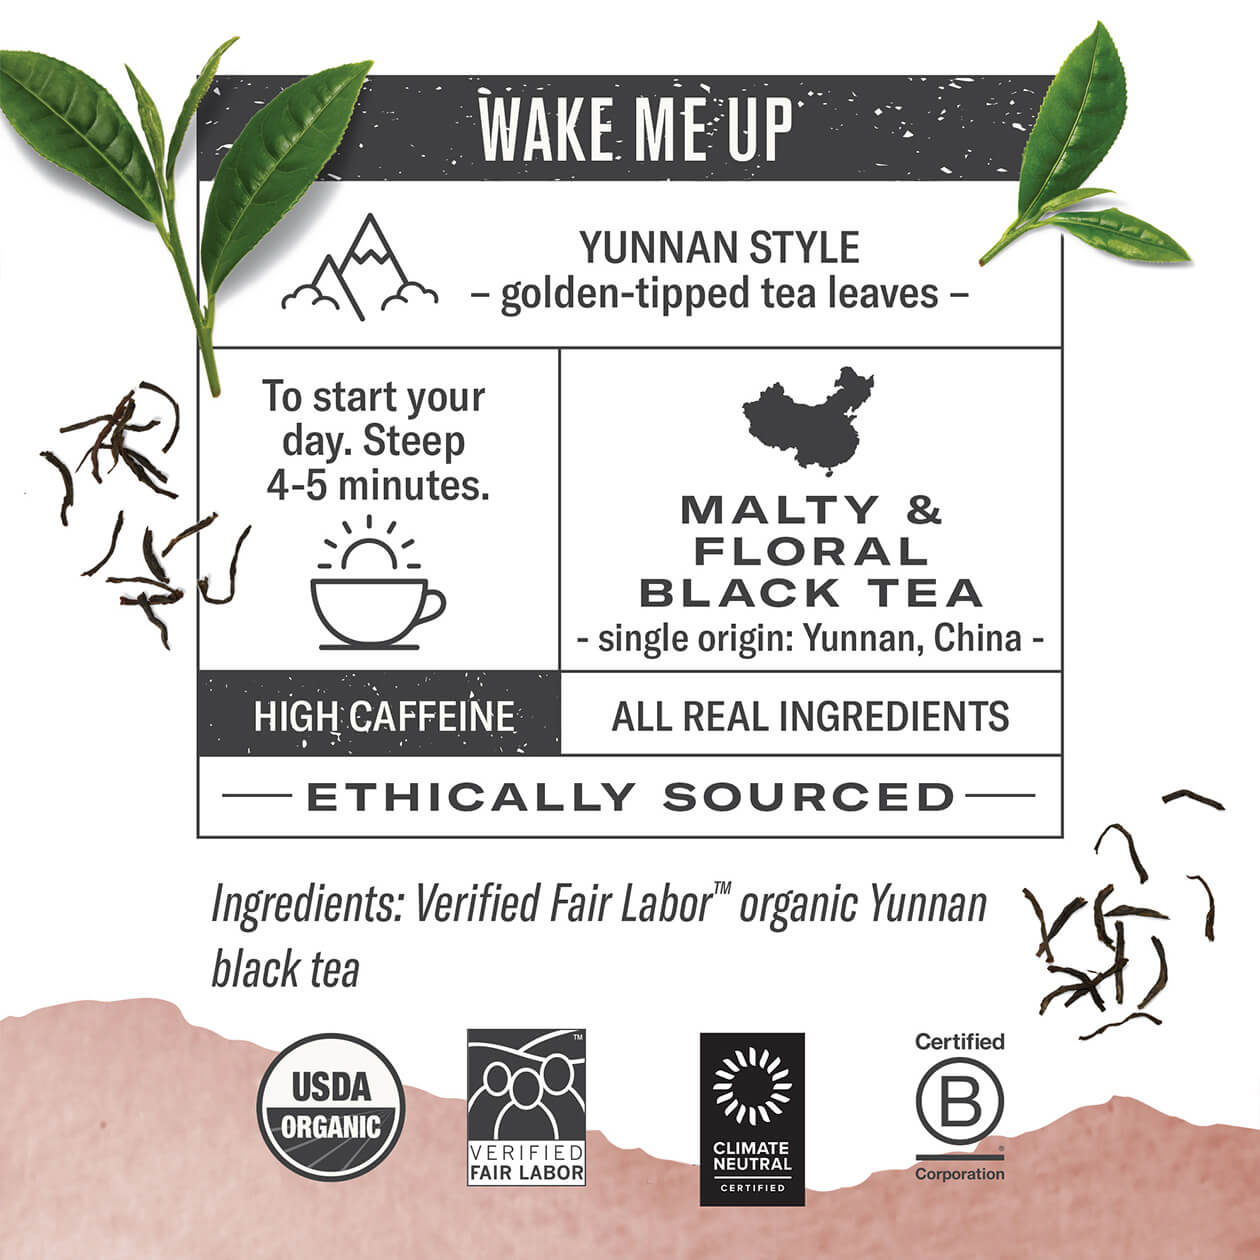 Infographic about Aged Earl Grey: steep 4-5 minutes, origin: Yunnan China, high caffeine, all real ingredients, ethically sourced